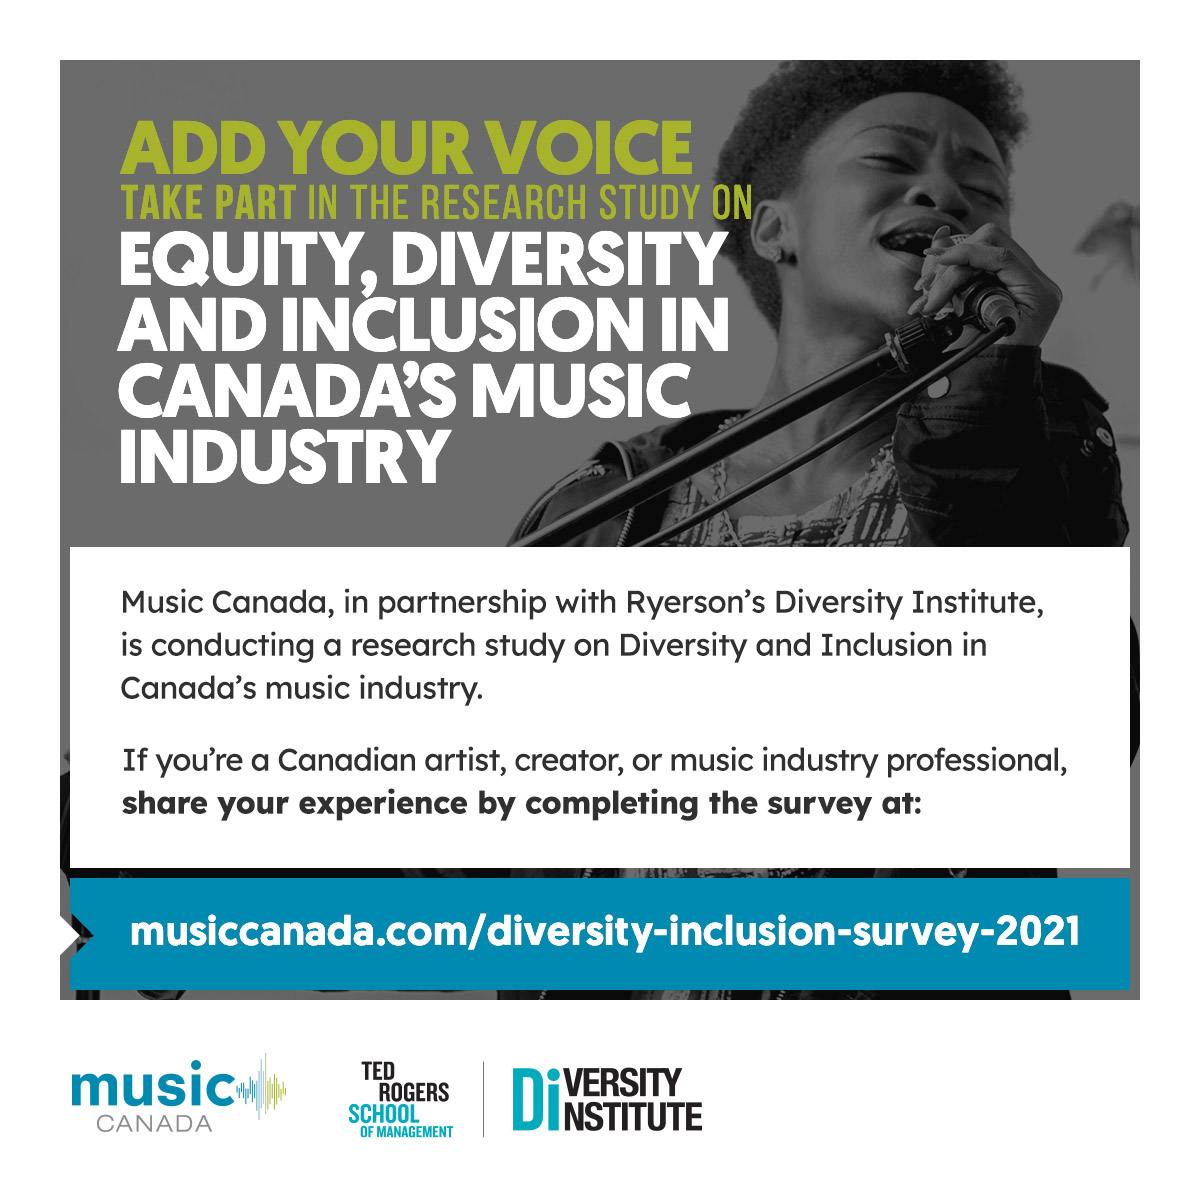 Music Canada launches research study on equity, diversity and inclusion in Canada’s music industry, in collaboration with Ryerson’s Diversity Institute thumbnail